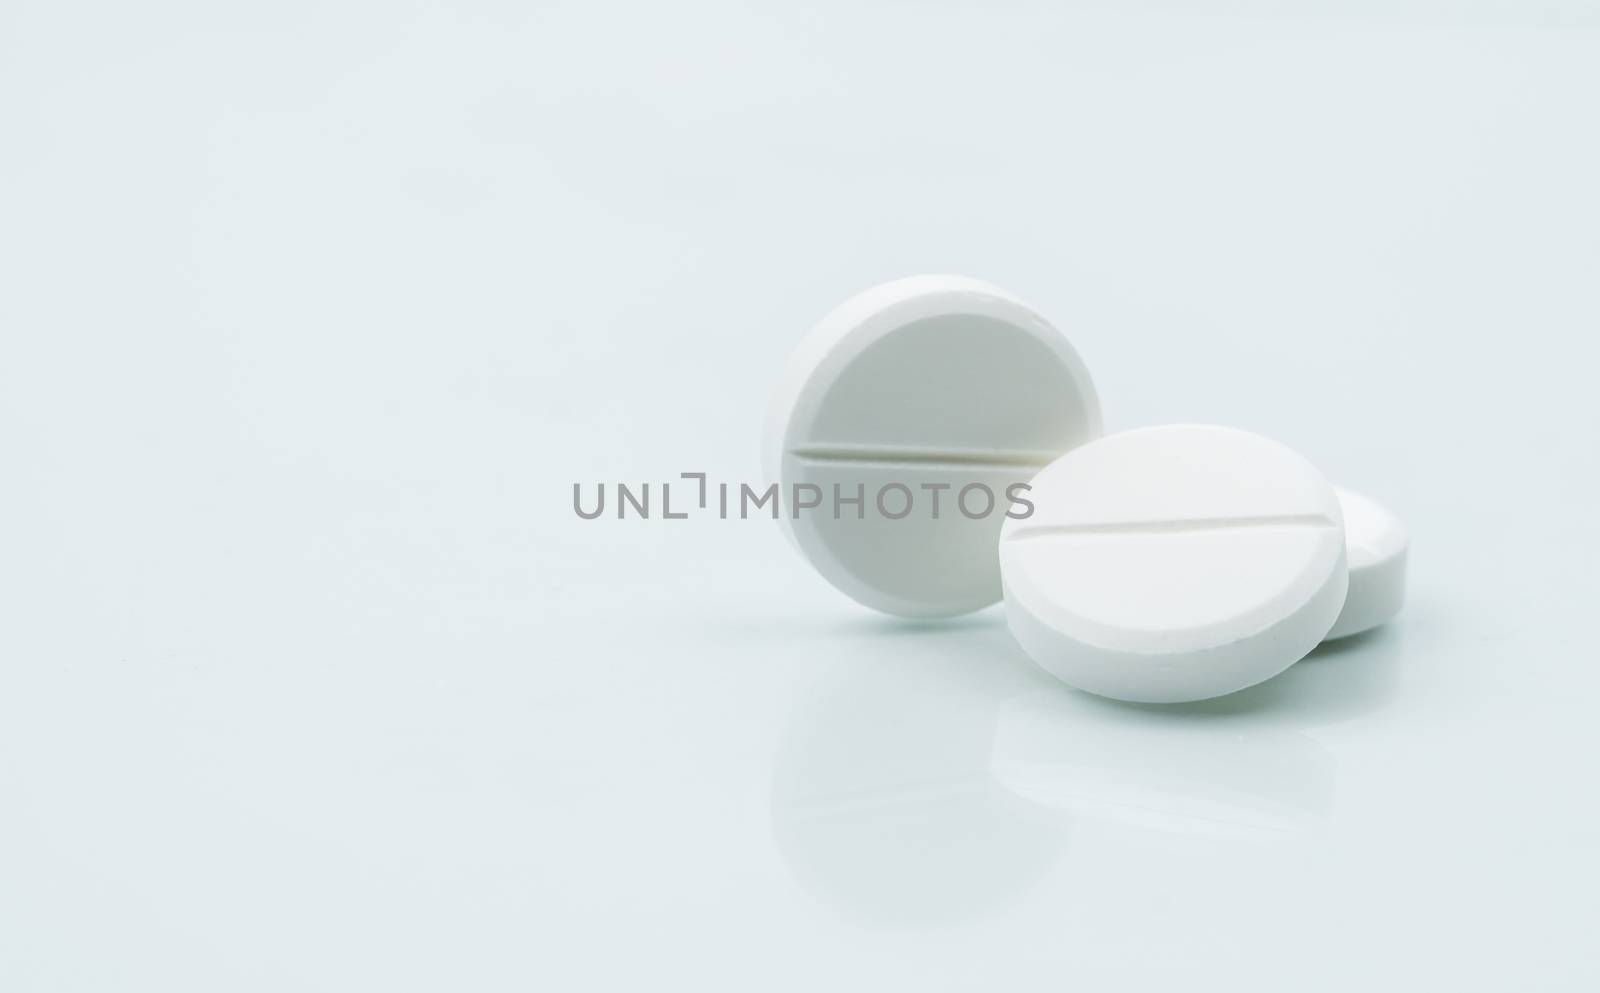 Macro shot of three white chewable tablets on white background with shadows. Antacids pills for relief stomachache from excess gastric acid in stomach. Stress induce gastric ulcer treatment concept.